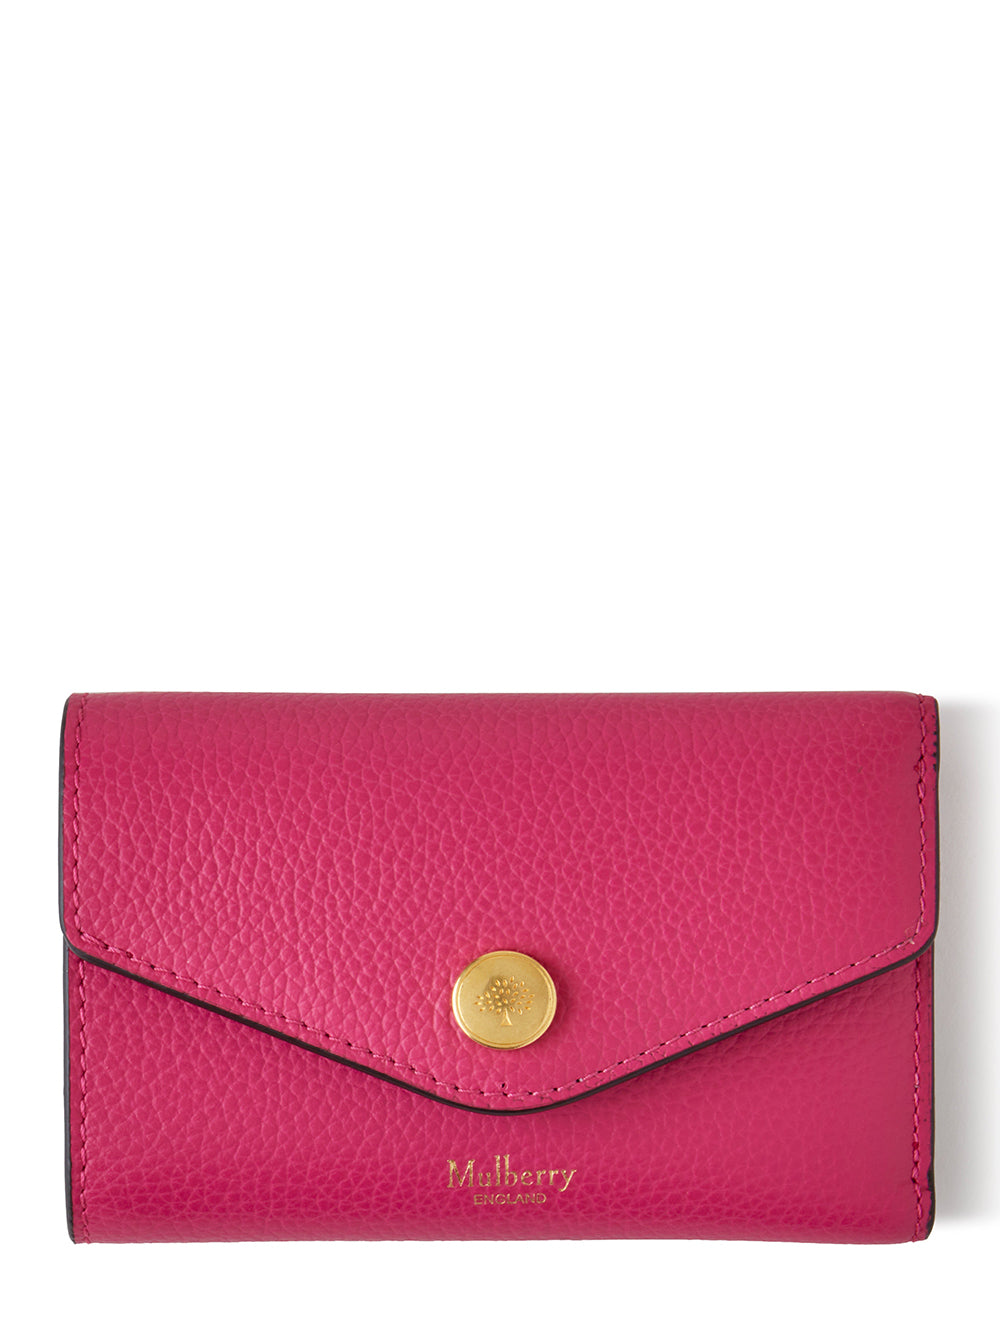 MULBERRY-Folded-Multi-Card-Wallet-Heavy-Grain-Mulberry-Pink-1